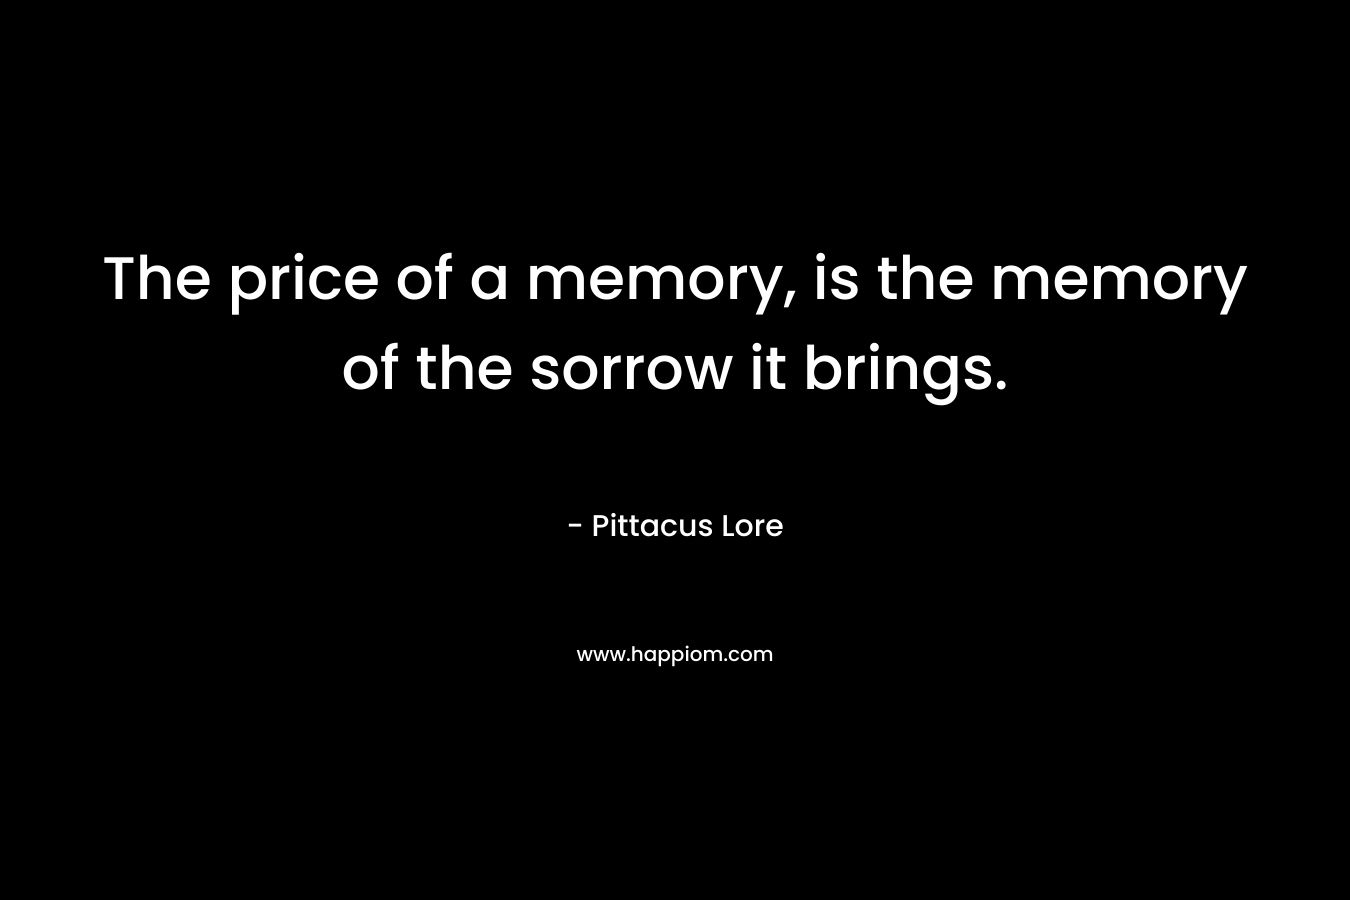 The price of a memory, is the memory of the sorrow it brings. – Pittacus Lore